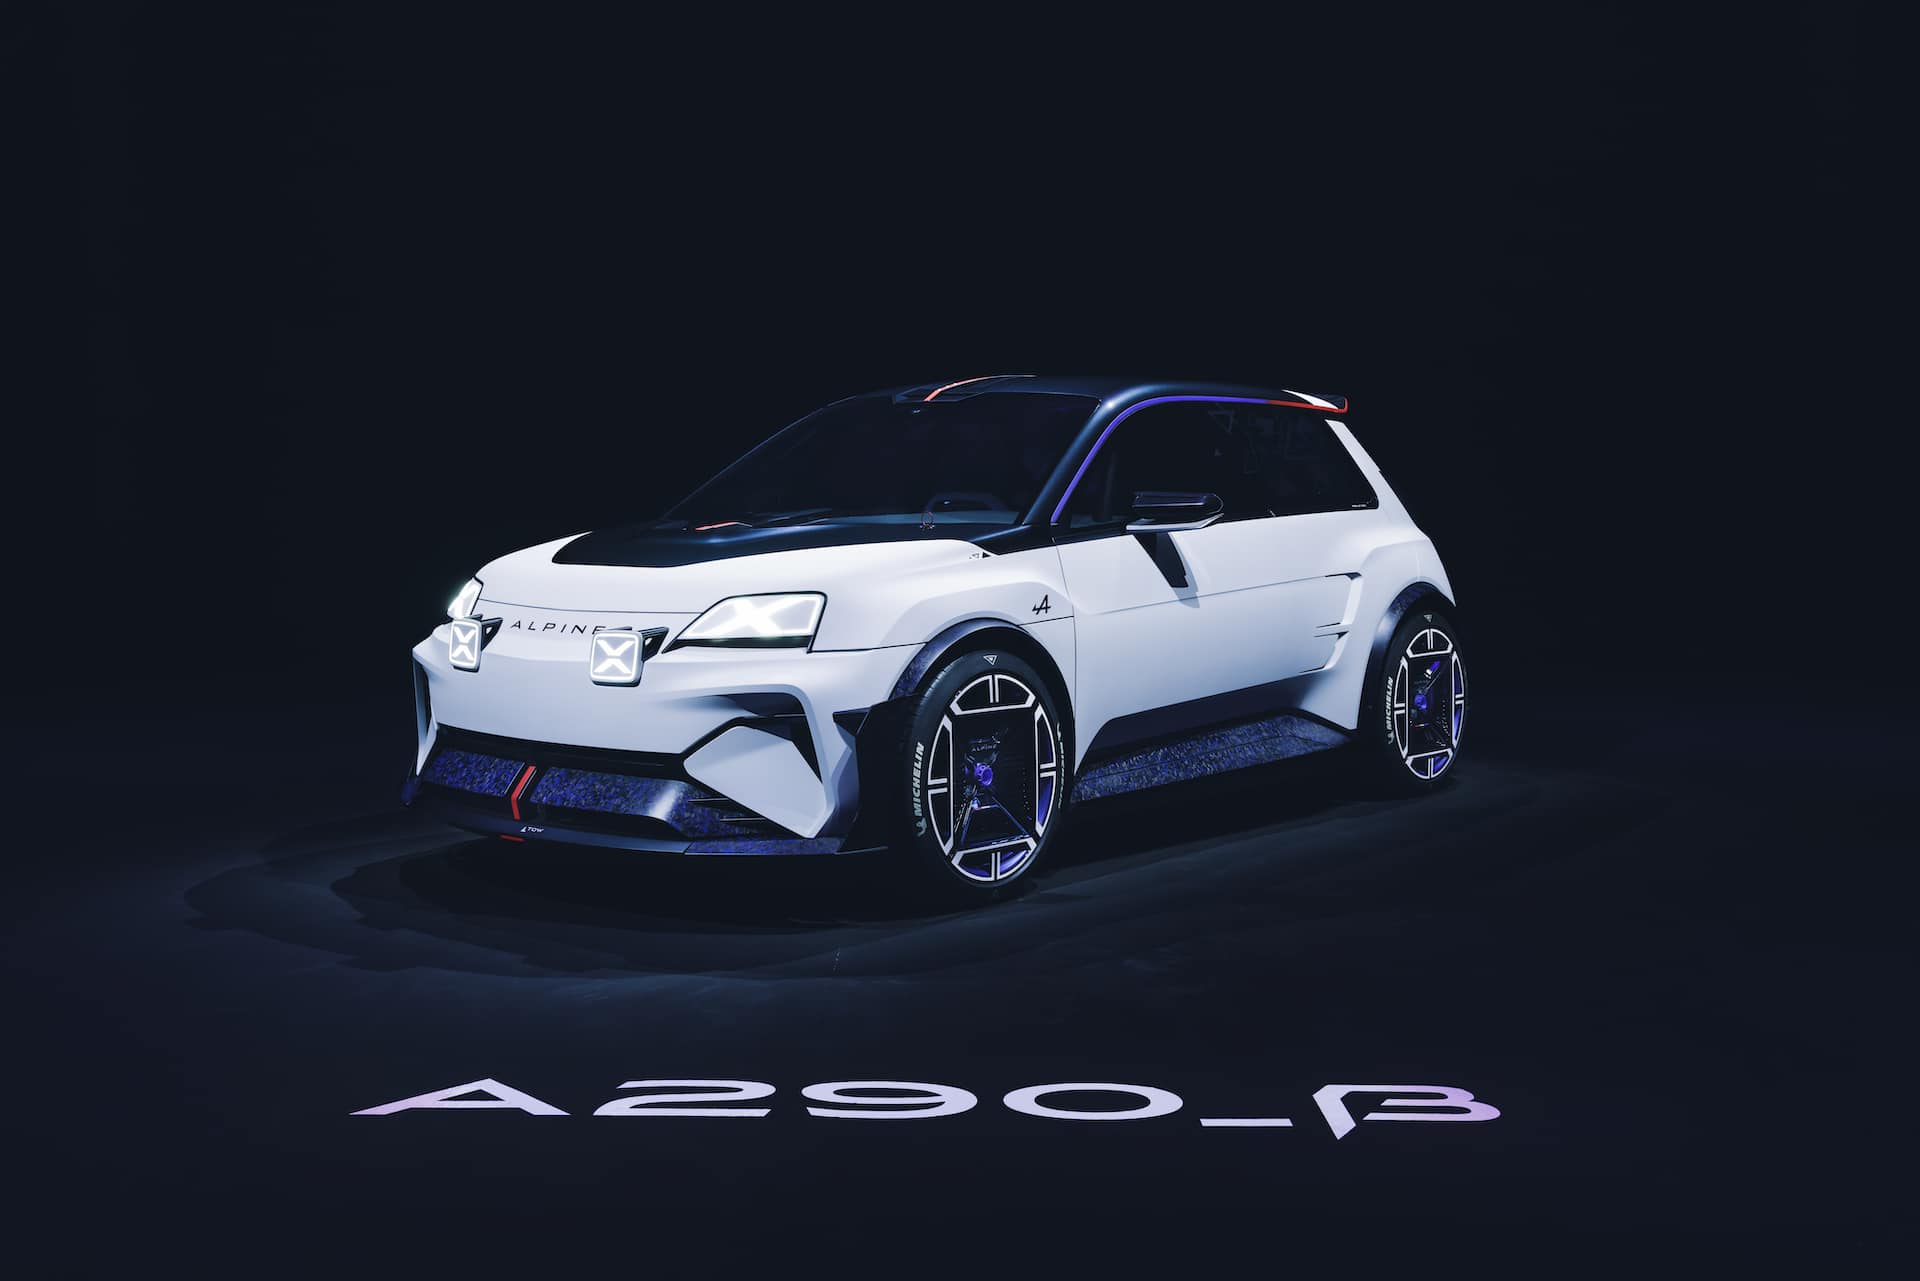 Alpine Unveils A290_β Show Car, First in its New Era of Electric Sports Cars